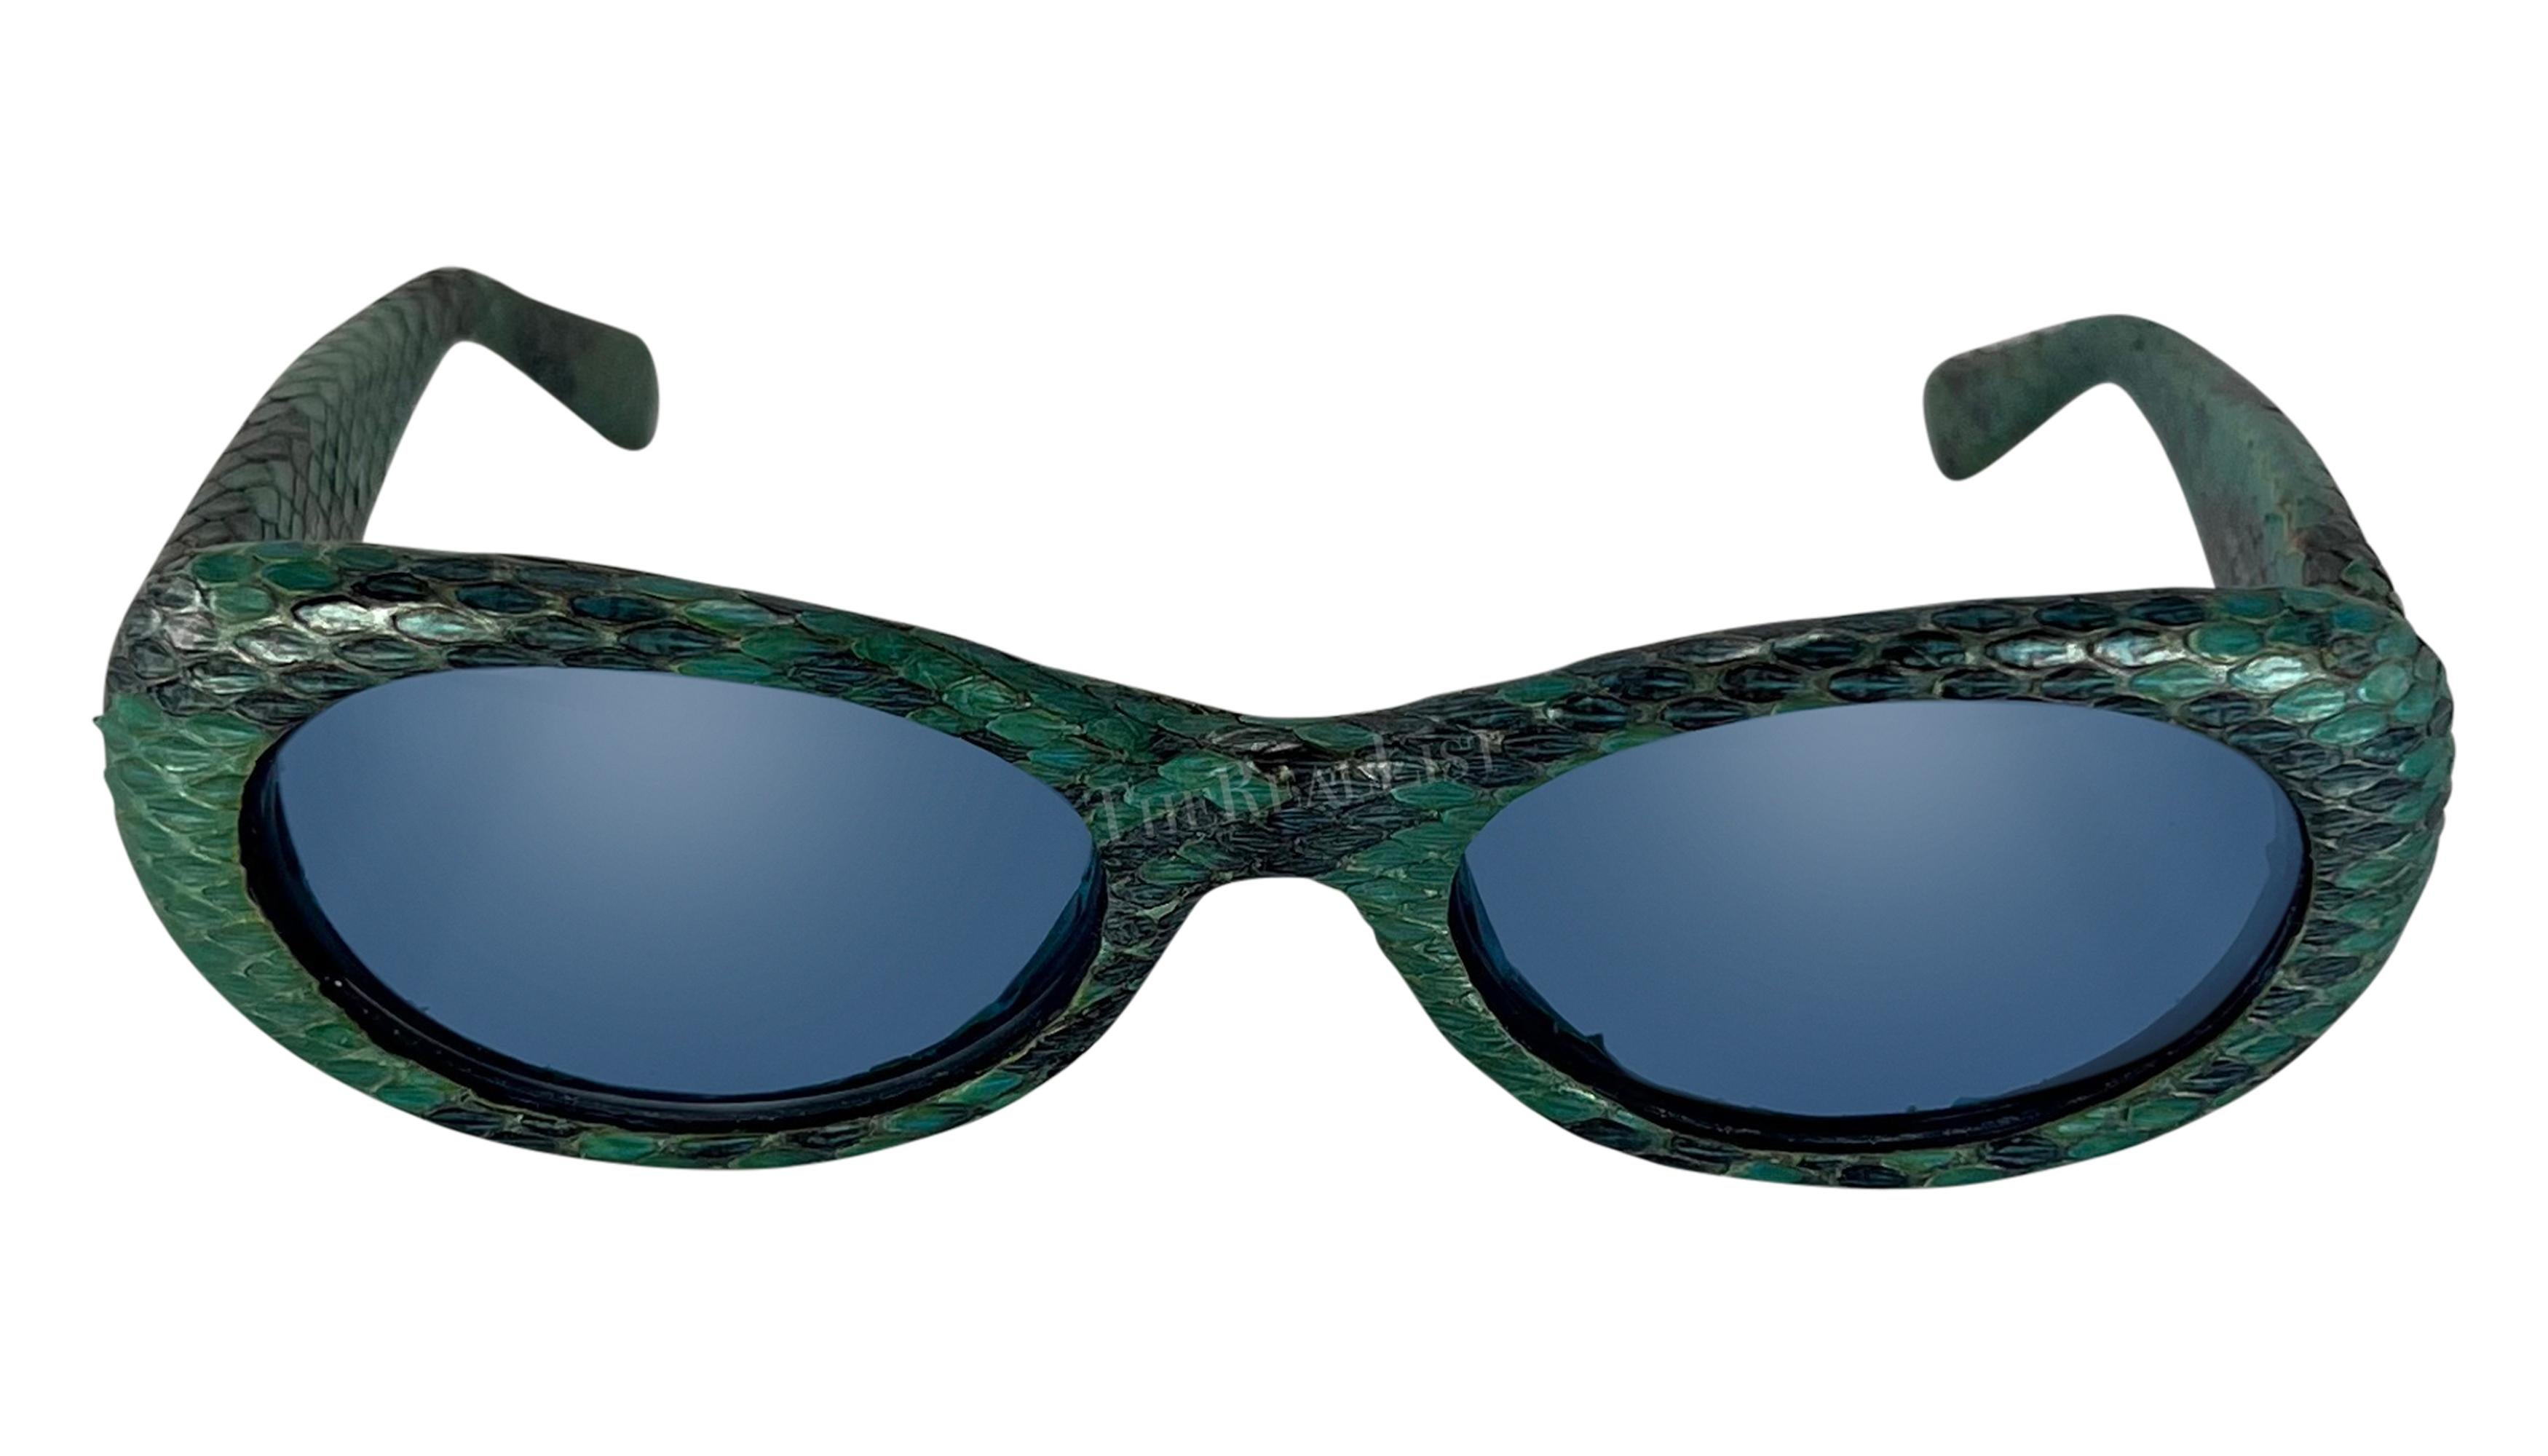 From the Spring/Summer 2000 collection, these blue python Gianni Versace oval sunglasses, designed by Donatella Versace, are covered in blue python skin. The glasses feature light blue lenses and are made complete with a gold studded Greek key